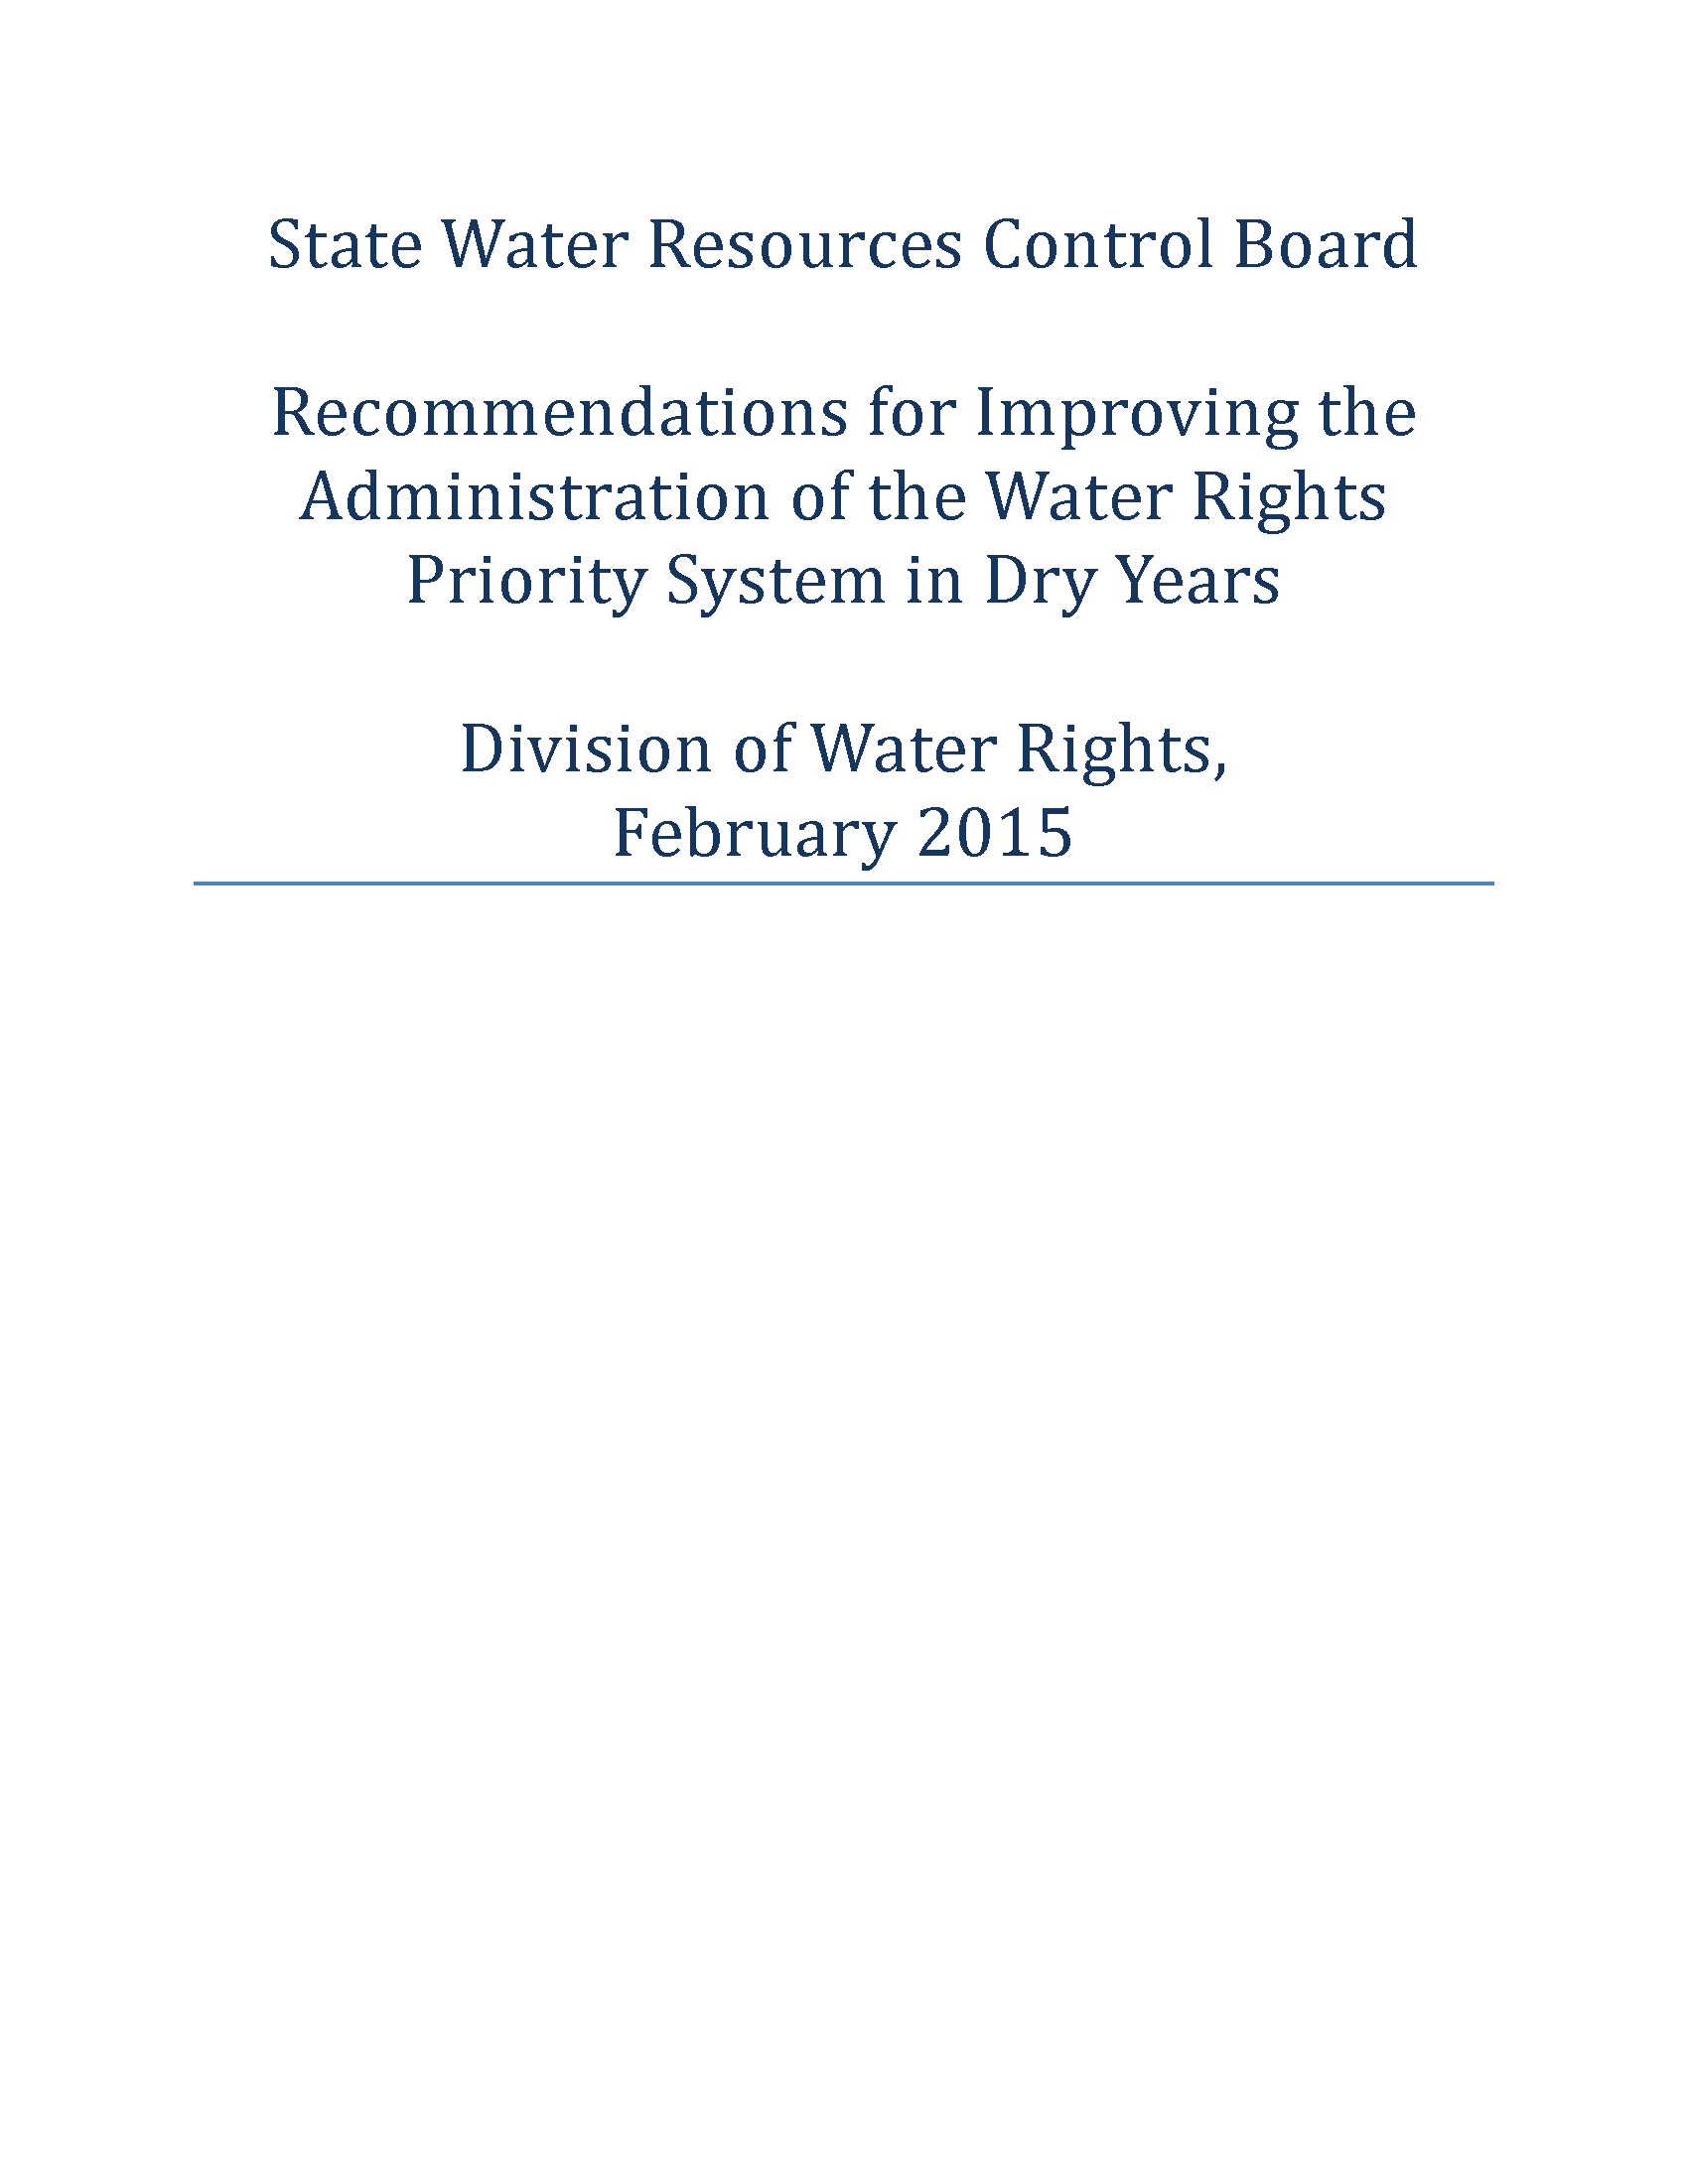 State Water Board Division of Water Rights Dry Year Report, 2015